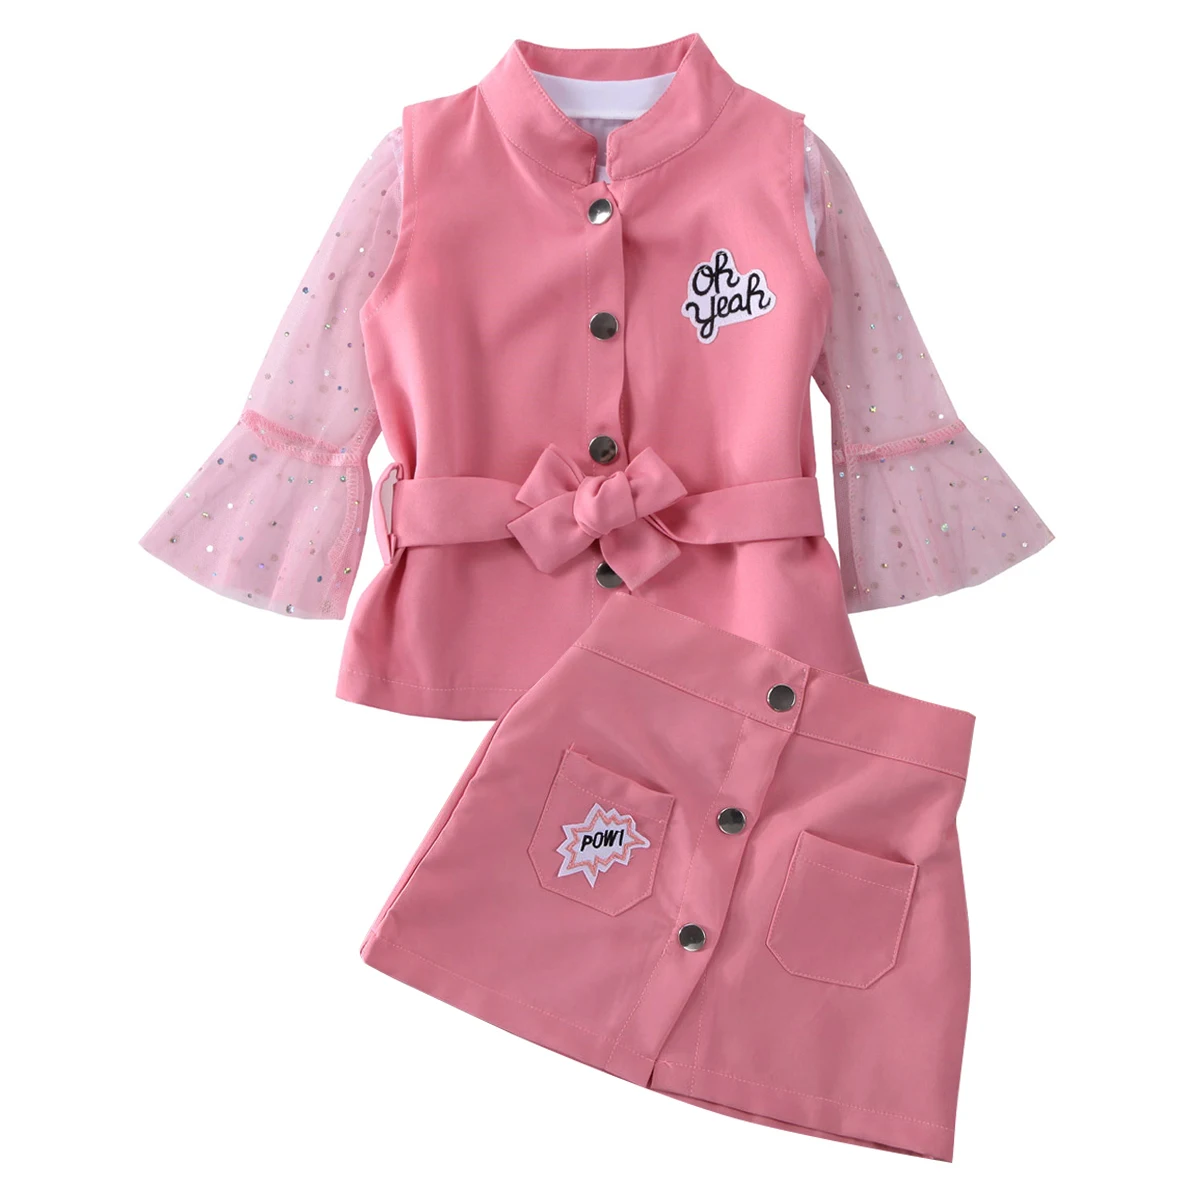 1-5Y Toddler Kid Girls Clothing Set Mesh Long Sleeve T shirt + Skirts Bow Waistcoat Outfits Autumn Spring Children Costumes | Мать и